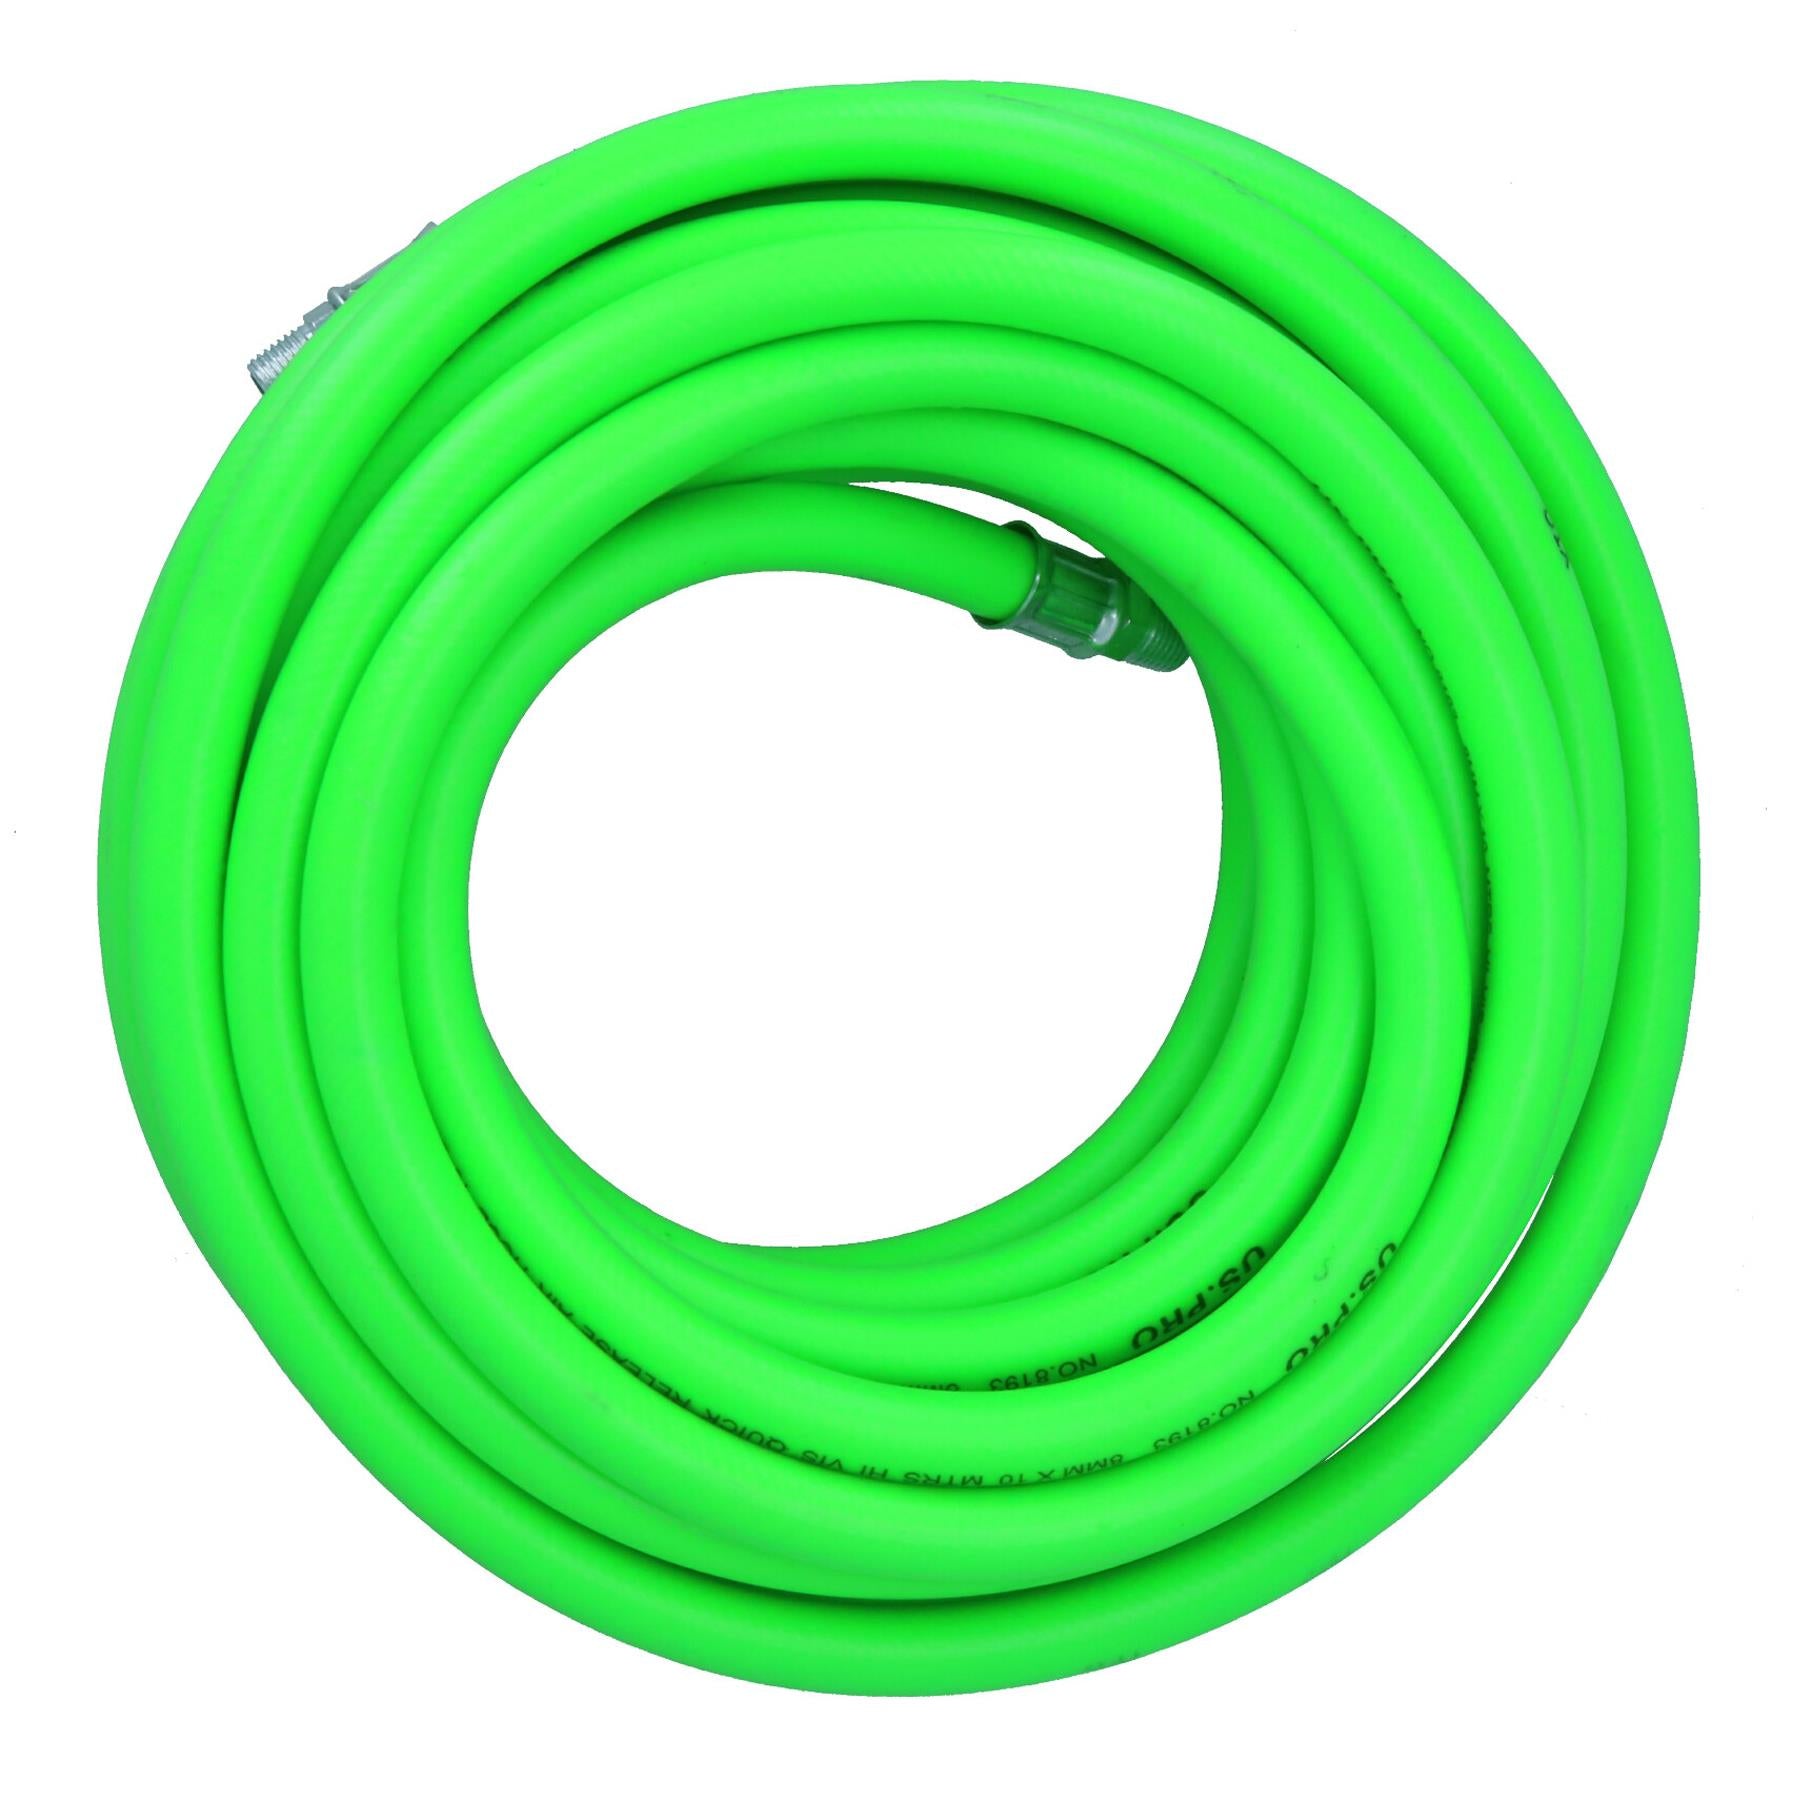 10 Metres Soft Rubber Hi-Vis Air Hose Airline + Euro Fittings + Tyre Inflator